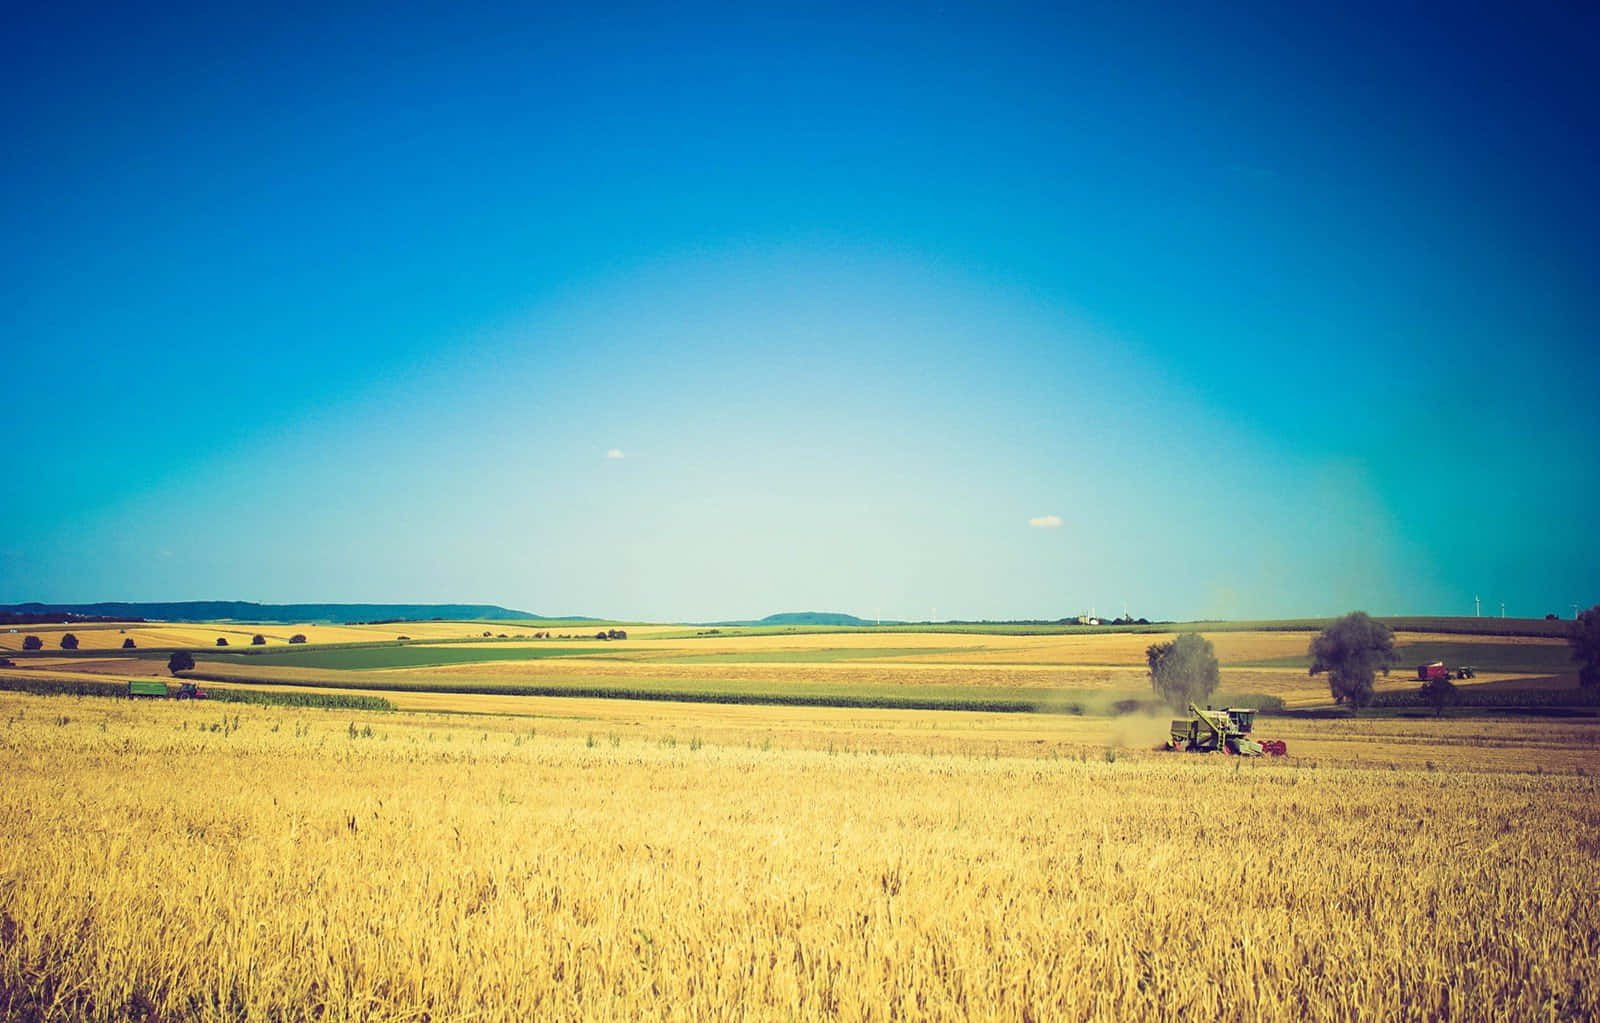 A Tractor Is Driving Through A Field